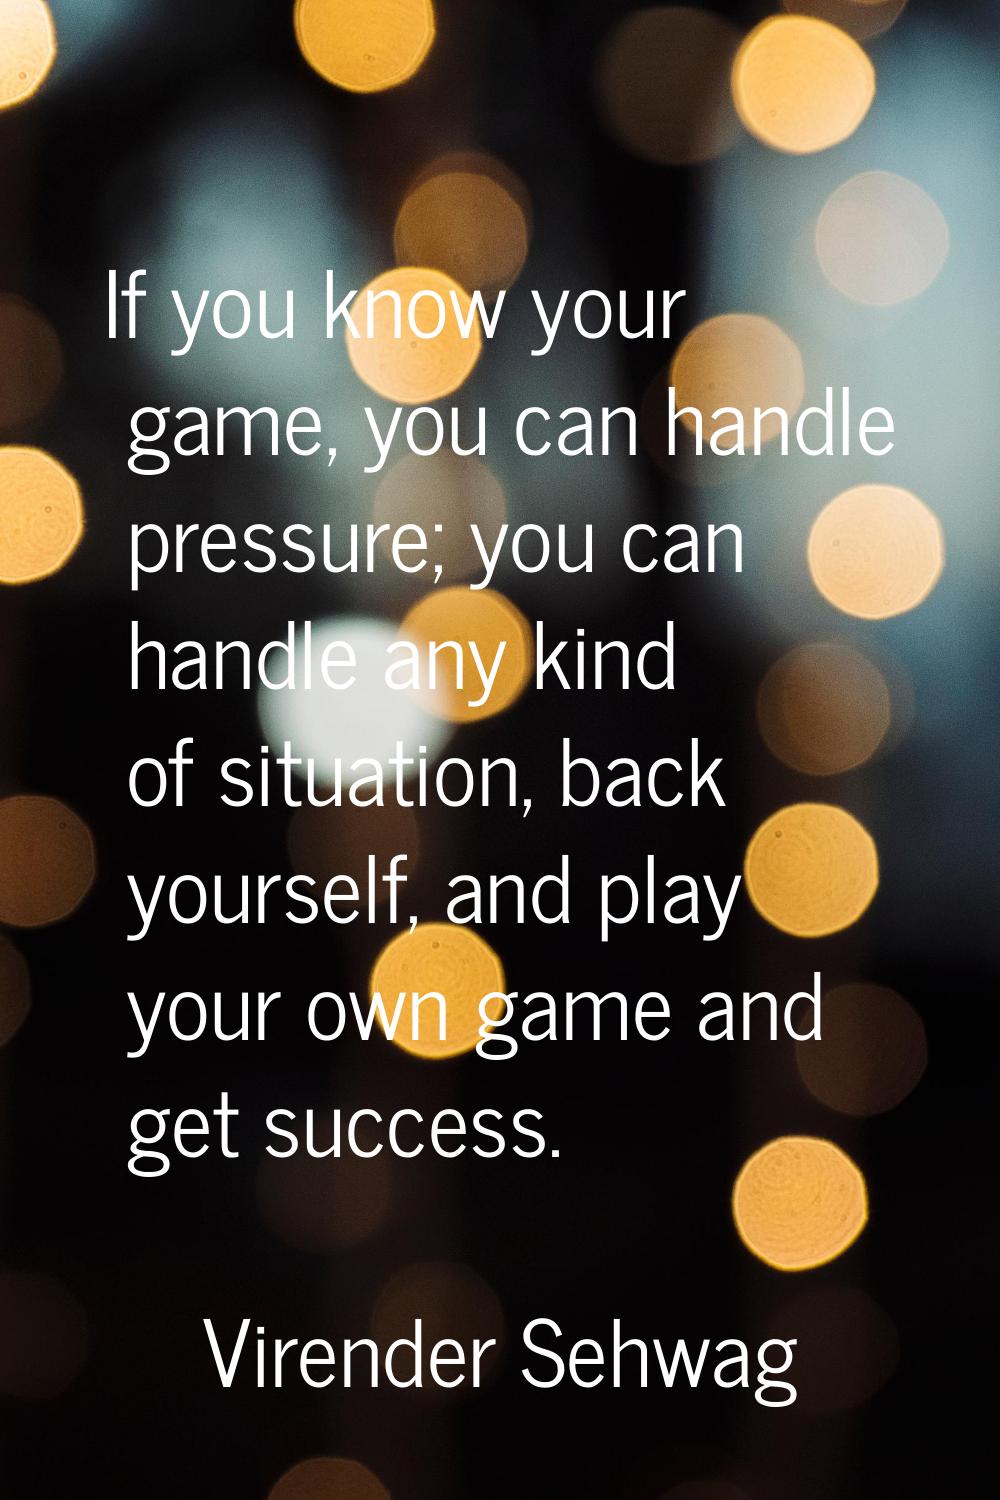 If you know your game, you can handle pressure; you can handle any kind of situation, back yourself